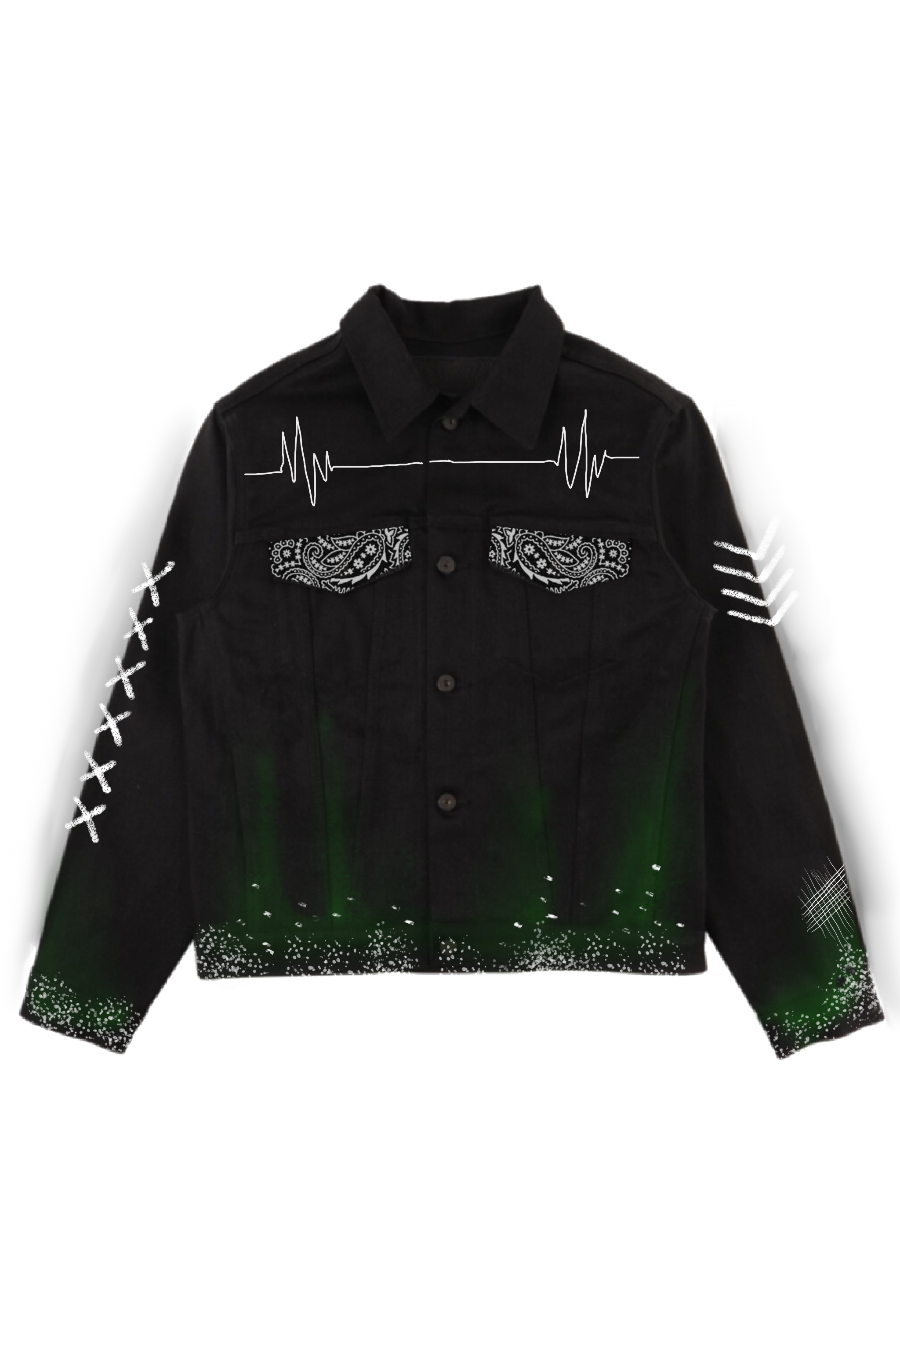 'LIFE'S A GAMBLE' KING OF CLUBS VALKYRE JACKET